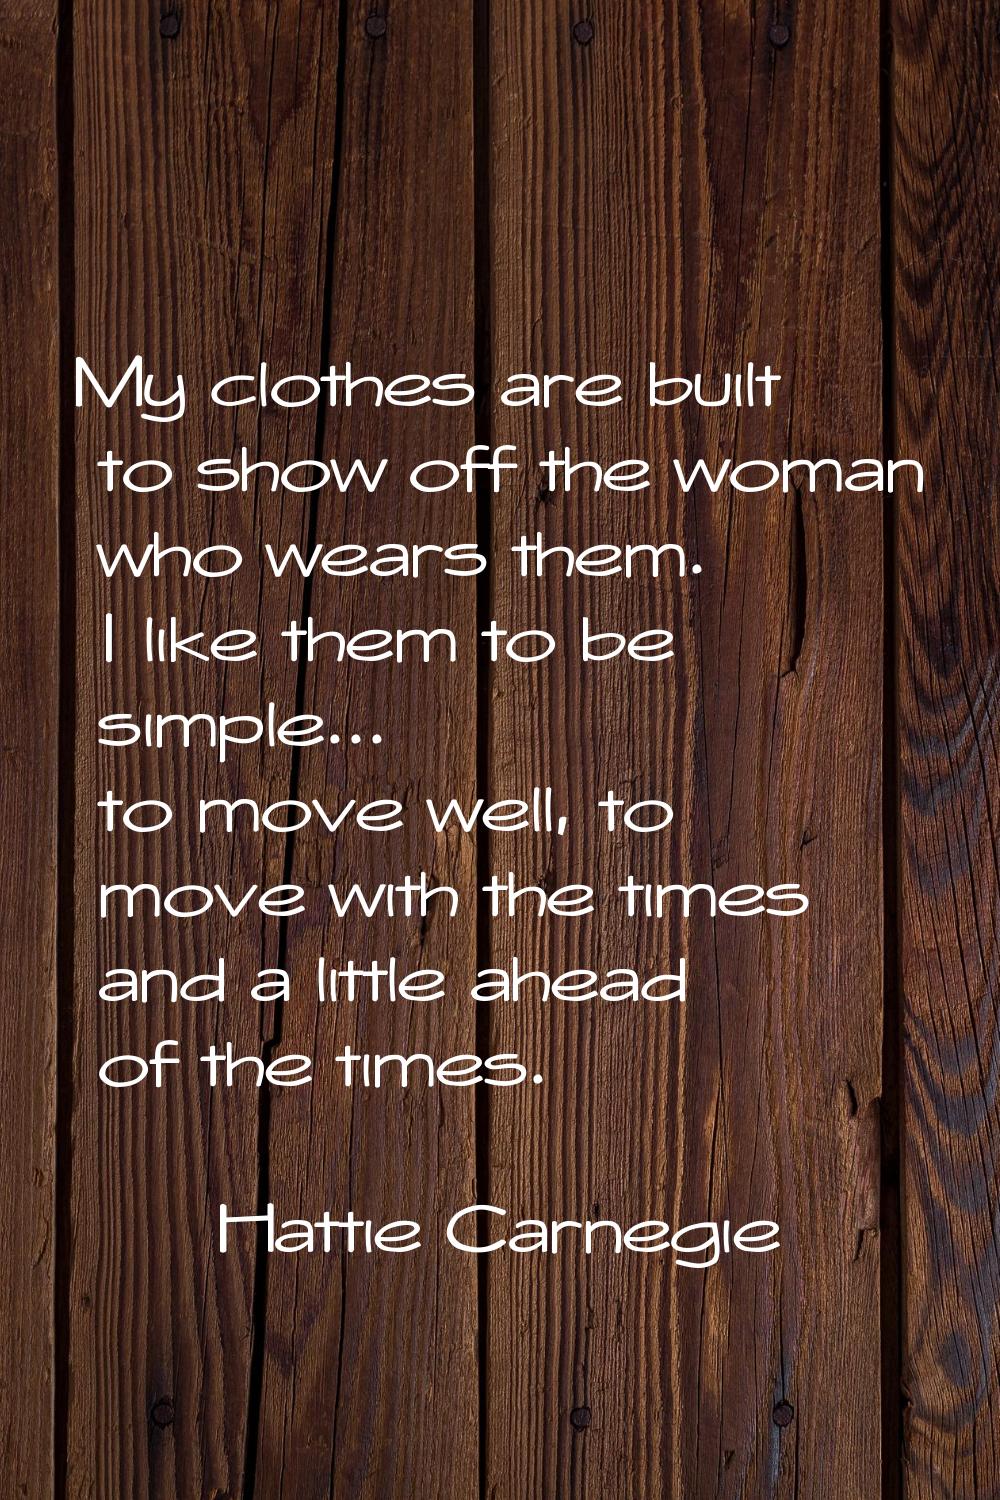 My clothes are built to show off the woman who wears them. I like them to be simple... to move well